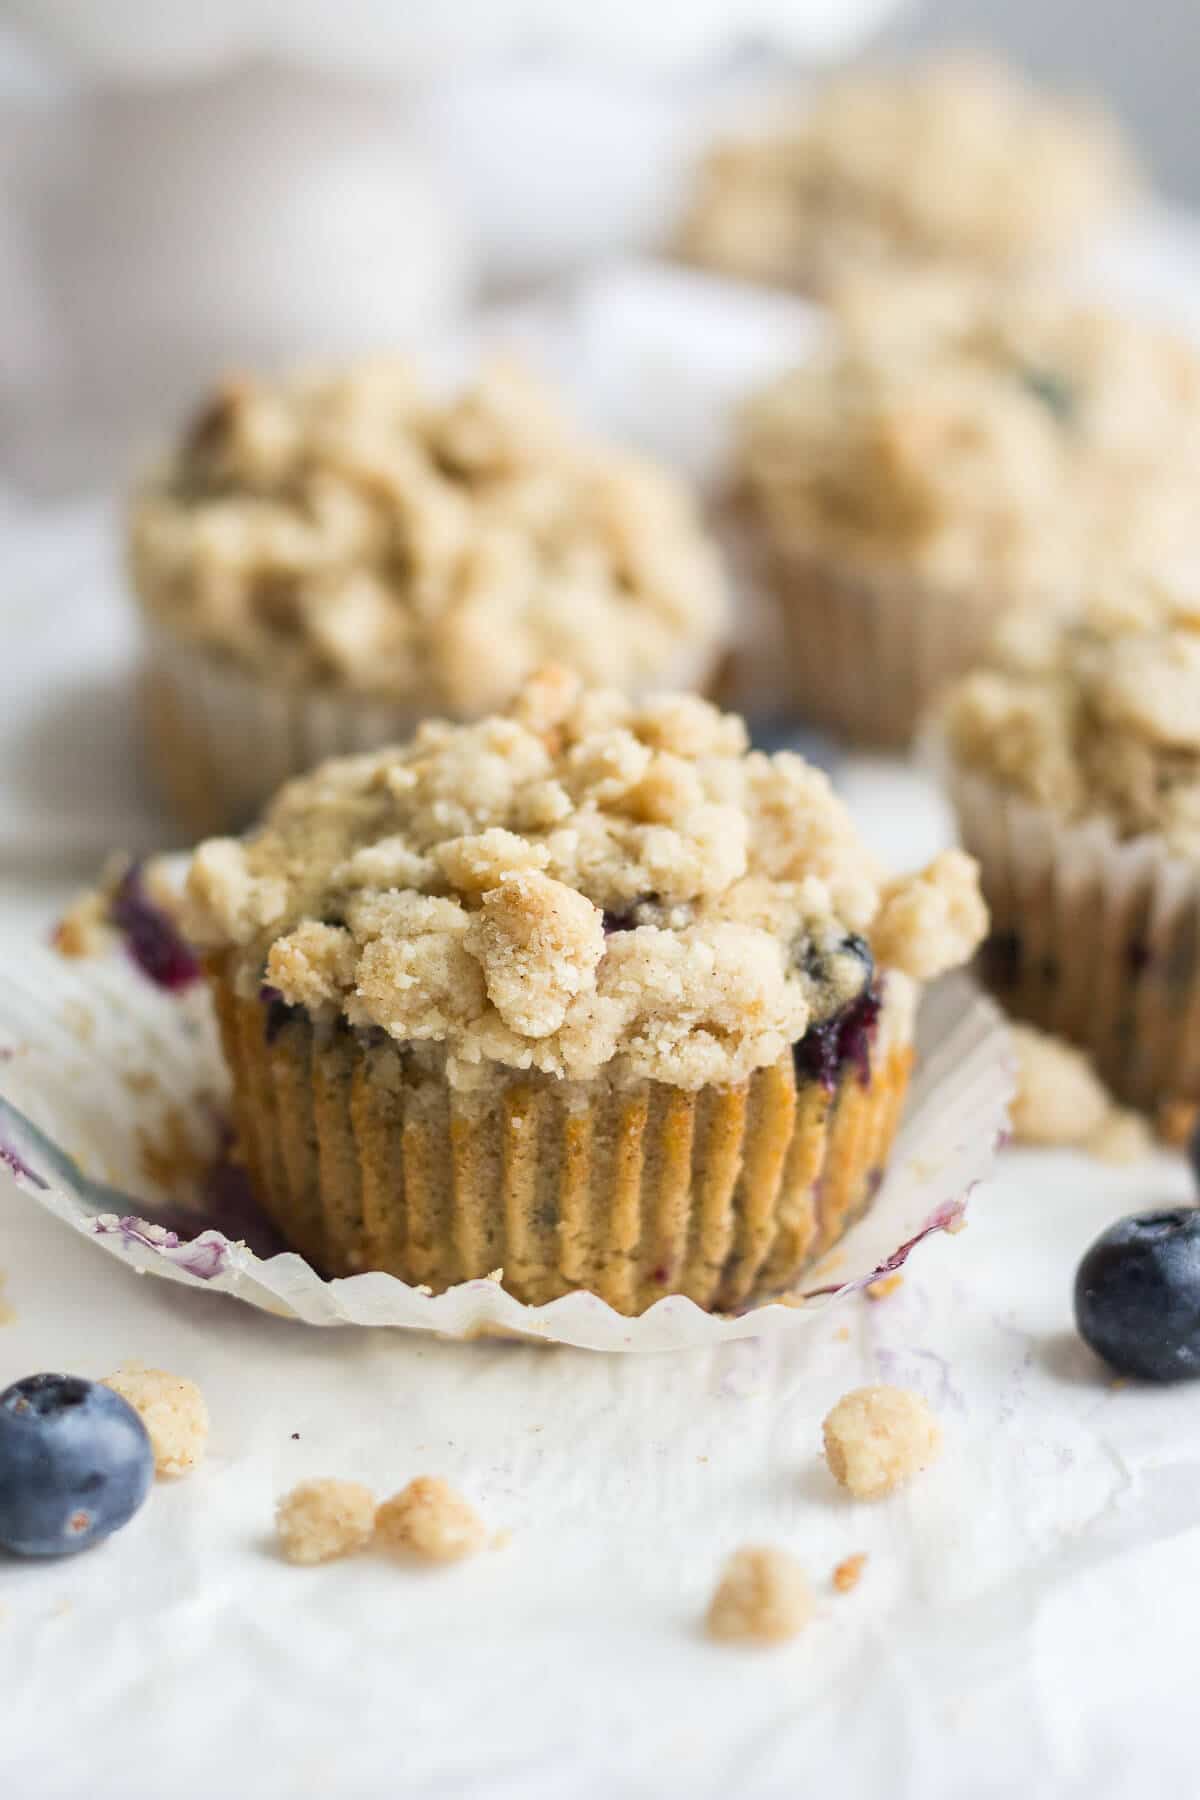 https://whatmollymade.com/wp-content/uploads/2017/05/easy-blueberry-muffins-with-crumble-topping-17.jpg